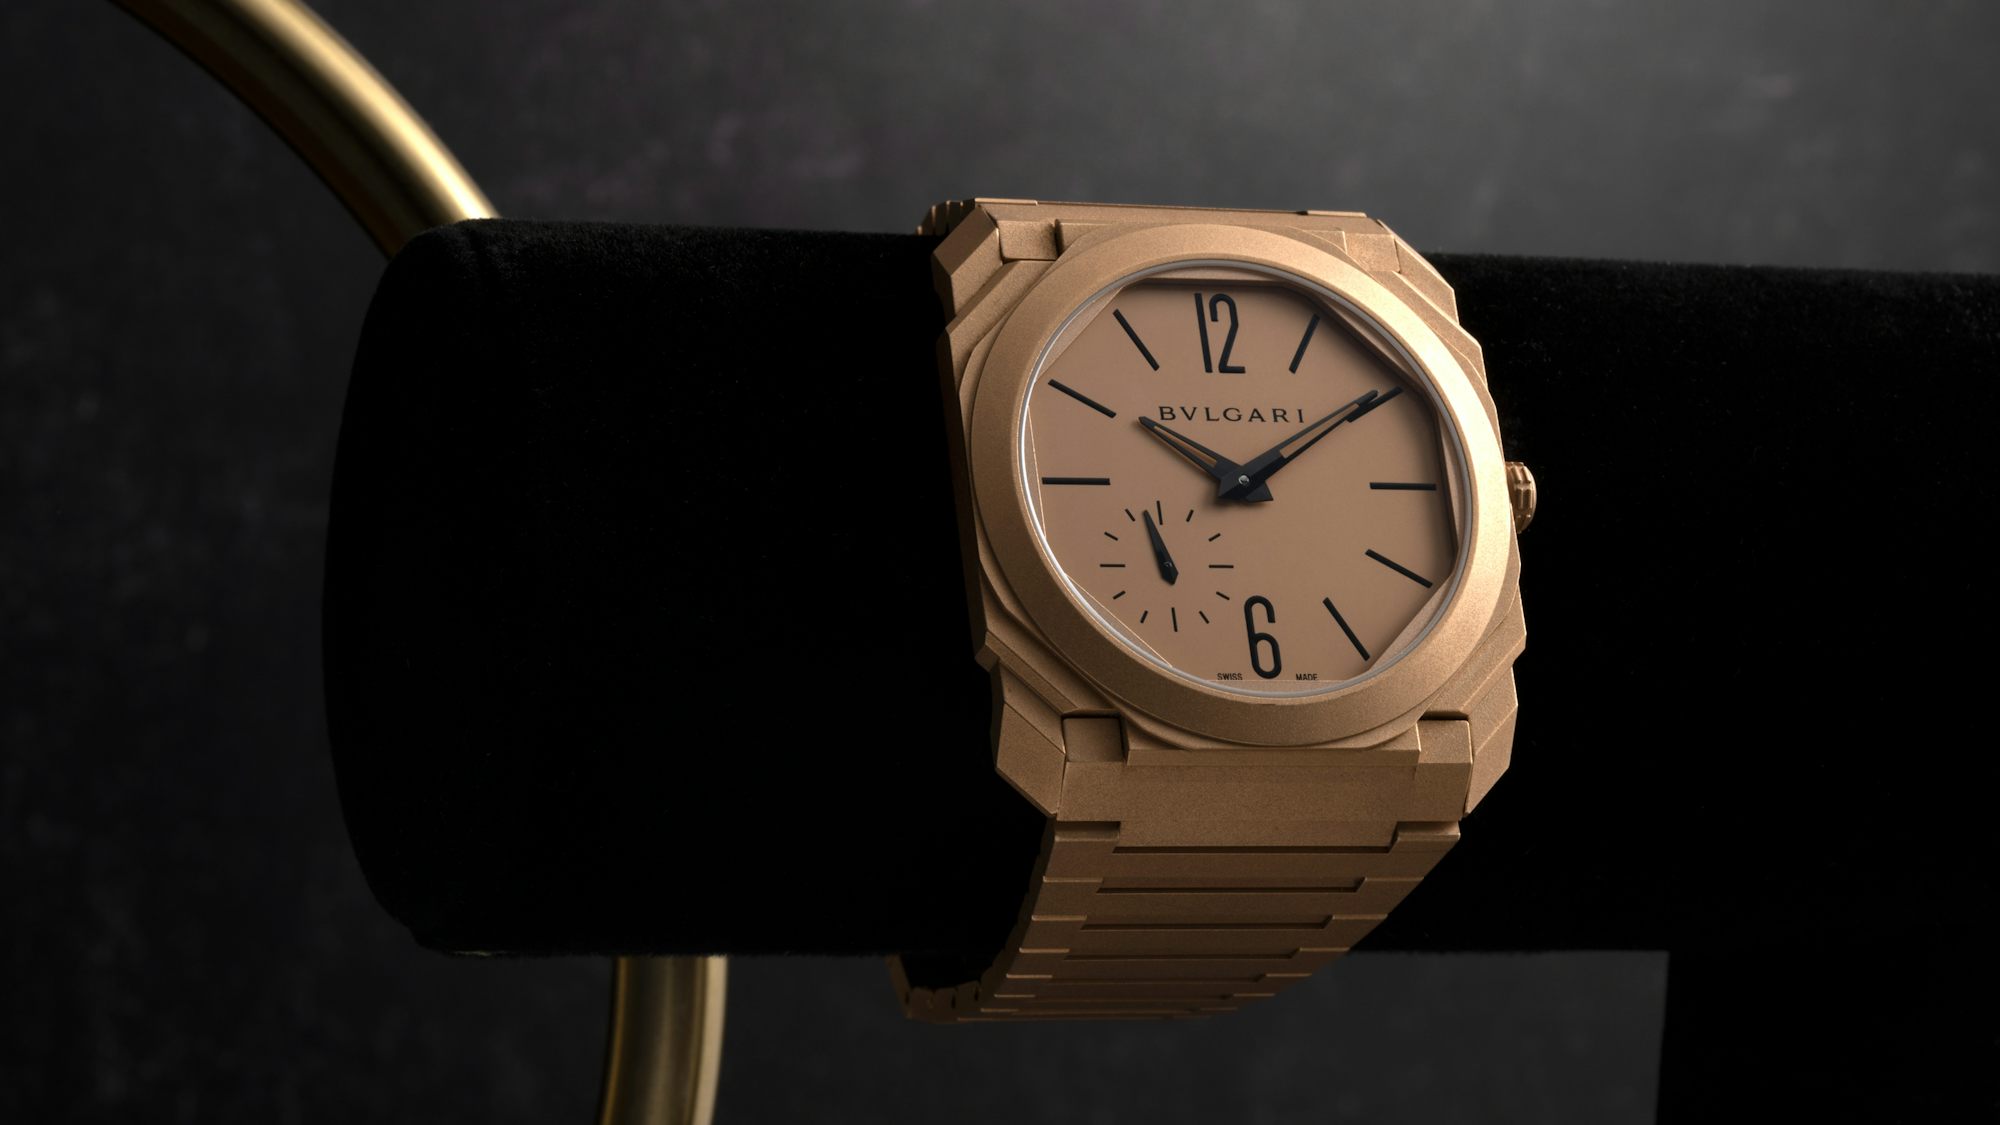 Gone Too Soon: The Bulgari Octo Finissimo In Blasted Rose Gold